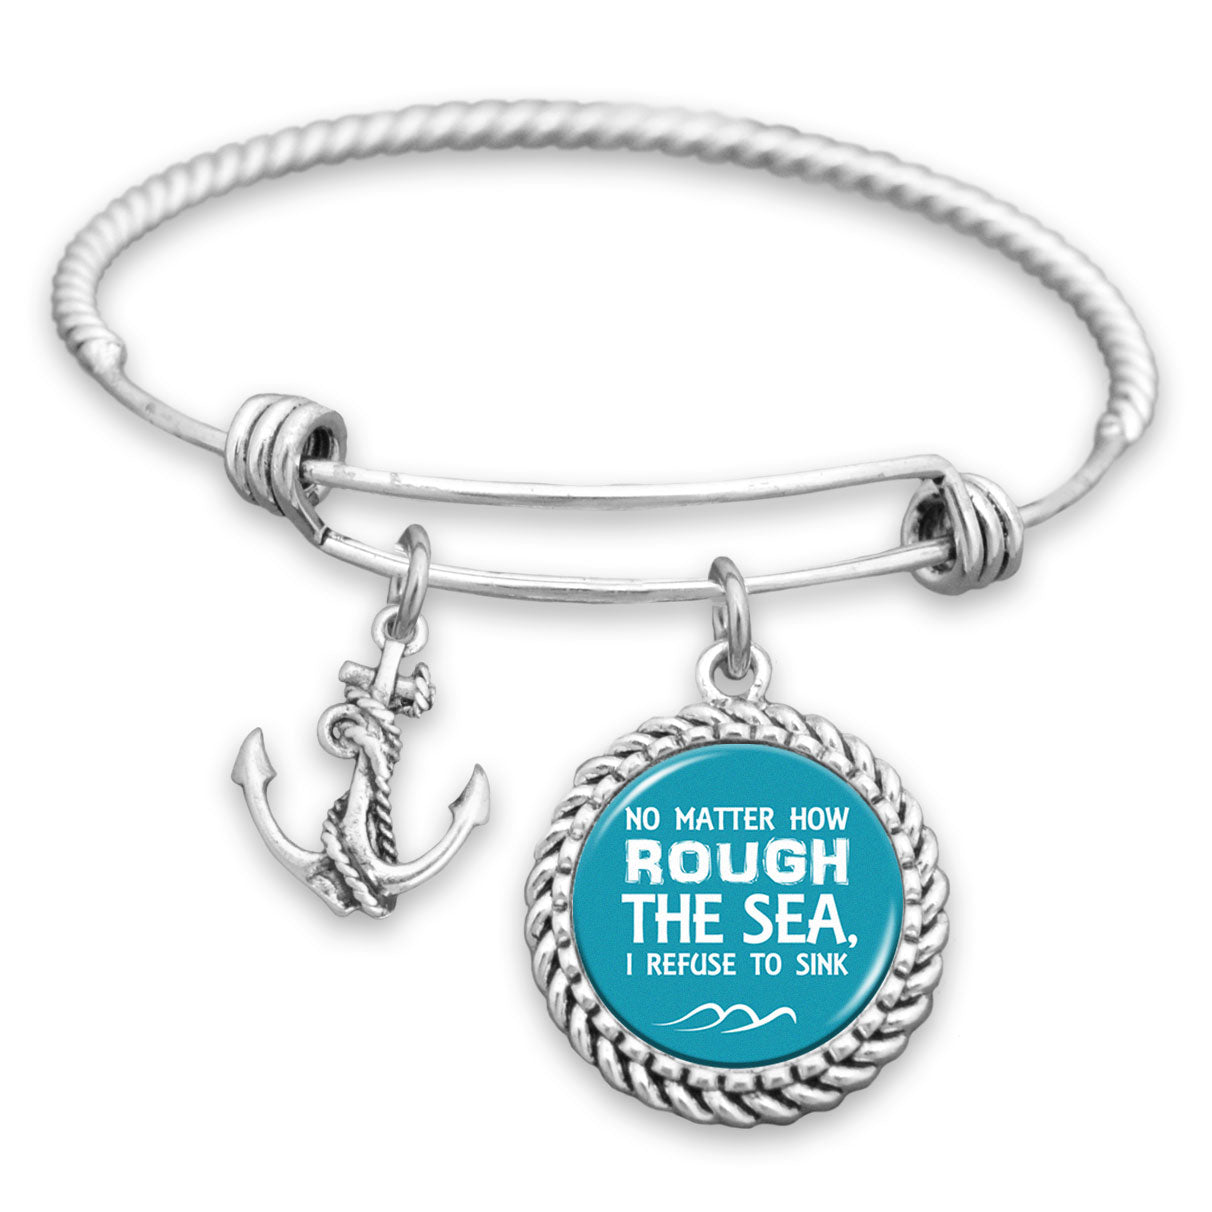 No Matter How Rough The Sea I Refuse To Sink Charm Bracelet